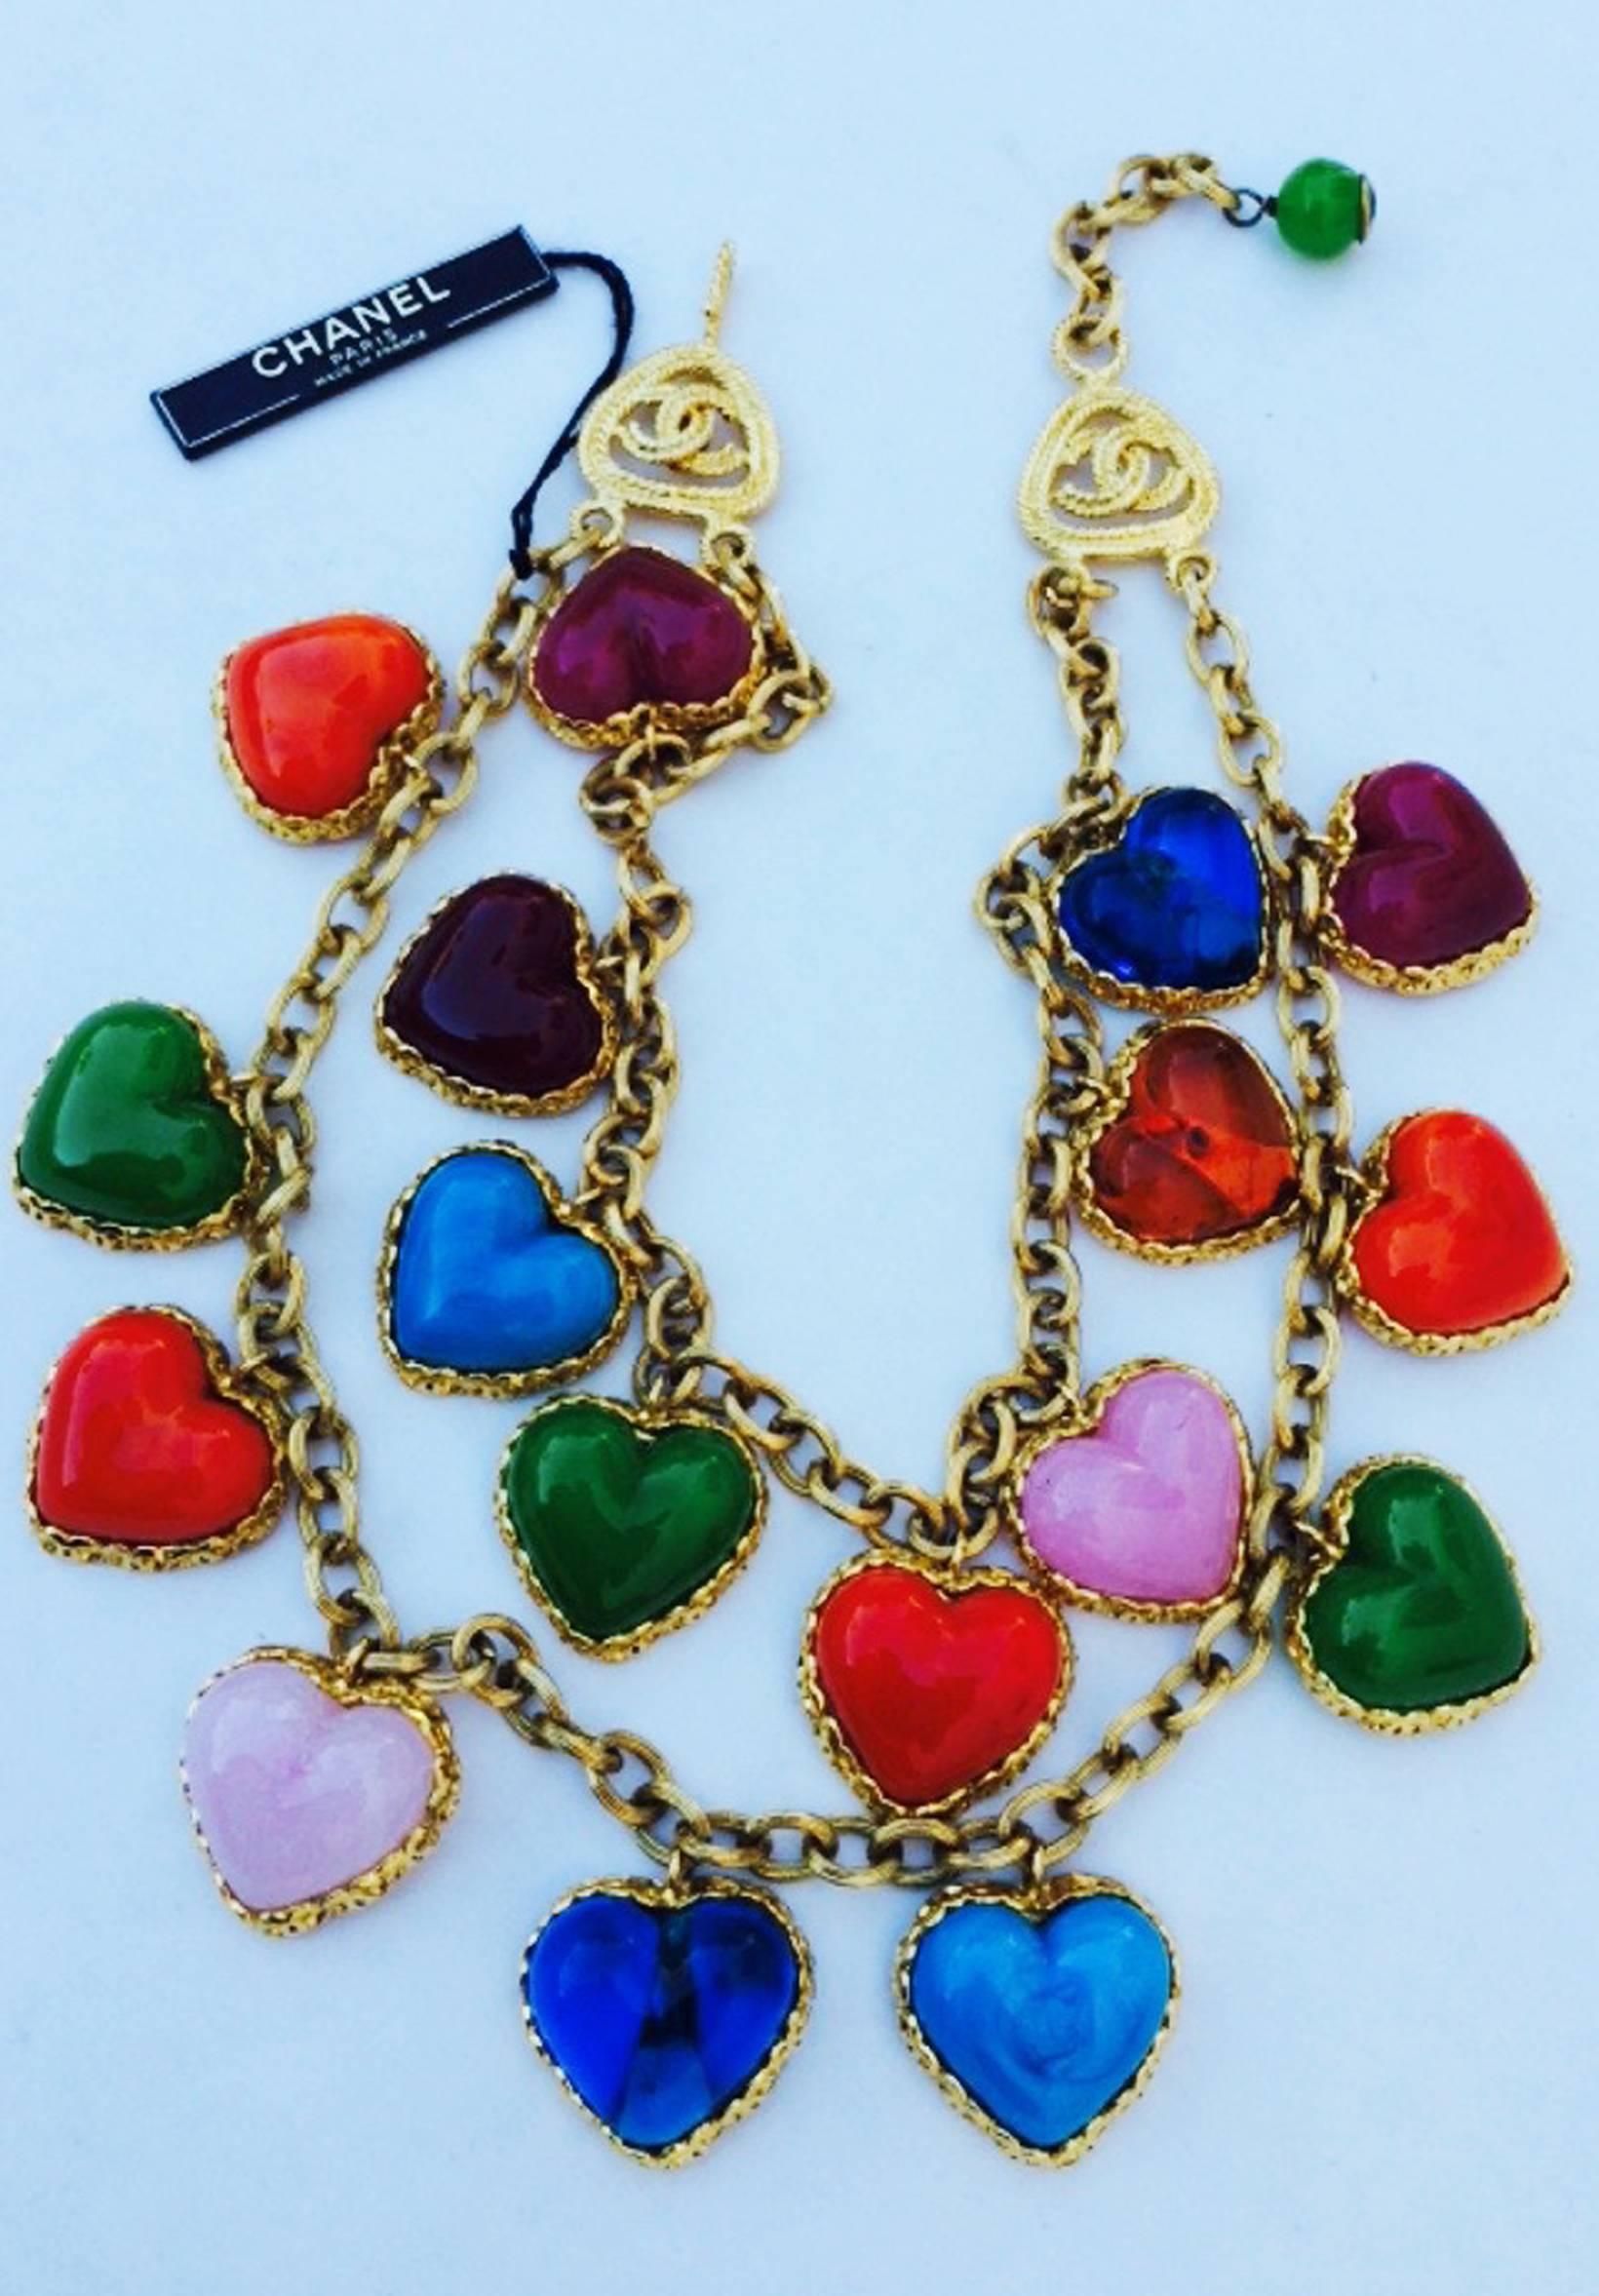 A fine and rare vintage Chanel bib necklace. Signed gilt metal double chain and bezel item features multi-color Maison Gripoix poured glass hearts. Item retains original hook closure and Chanel hang tag. Pristine unworn item.